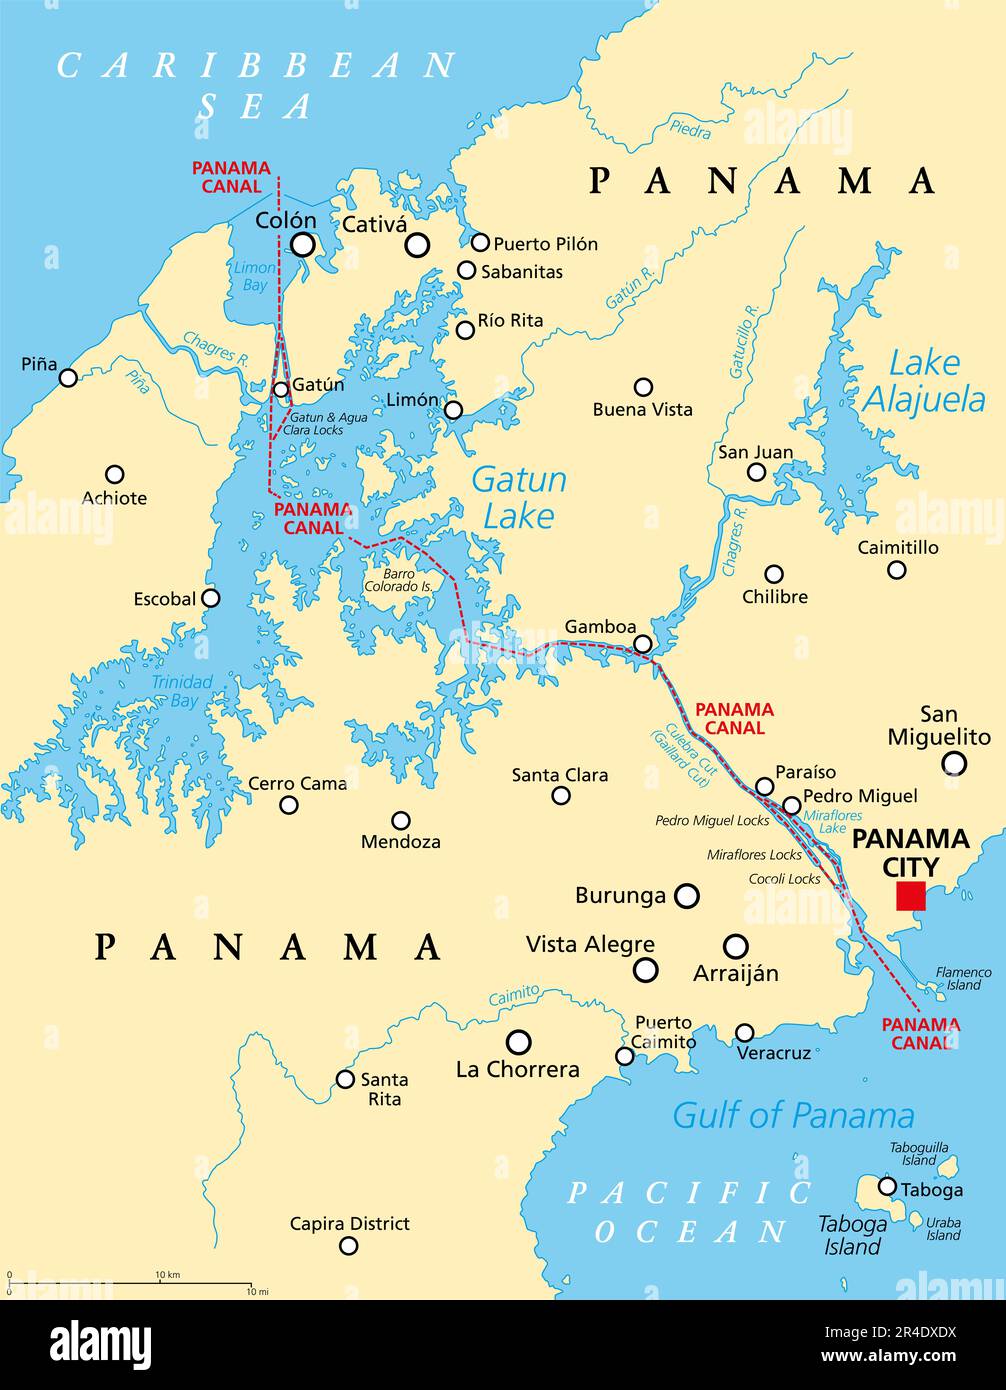 Panama Canal, political map. Artificial waterway in Panama, connecting ...